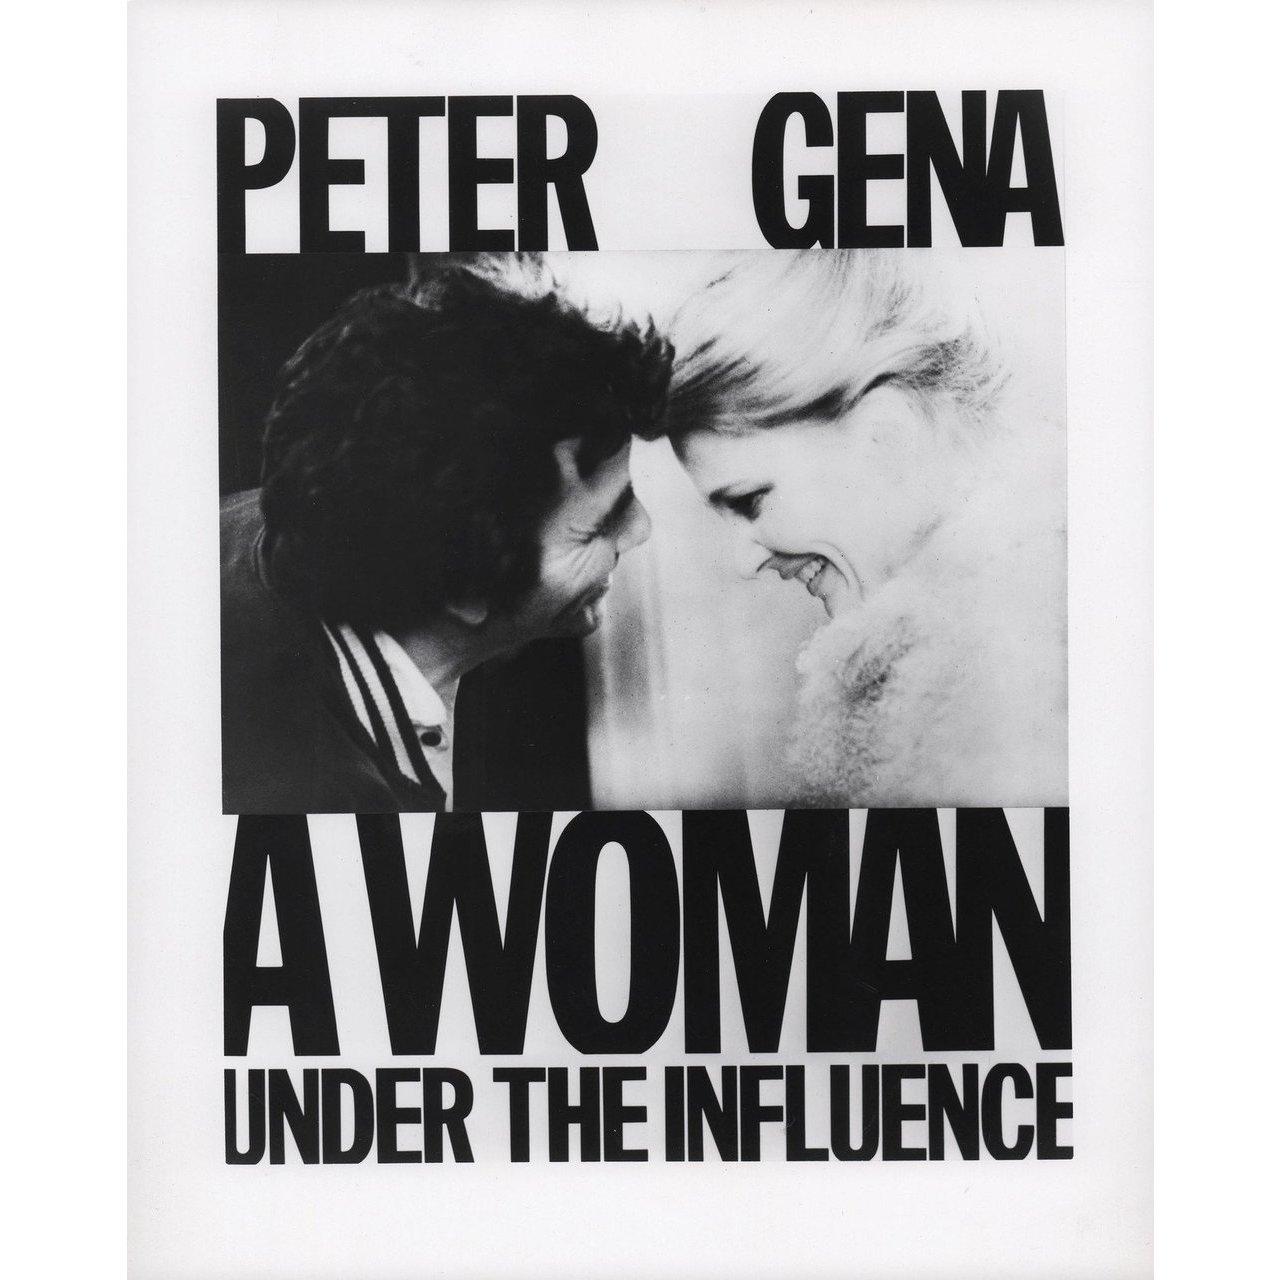 Original 1974 U.S. silver gelatin single-weight photo for the film A Woman Under the Influence directed by John Cassavetes with Peter Falk / Gena Rowlands / Fred Draper / Lady Rowlands. Very good-fine condition, folded. Many original posters were